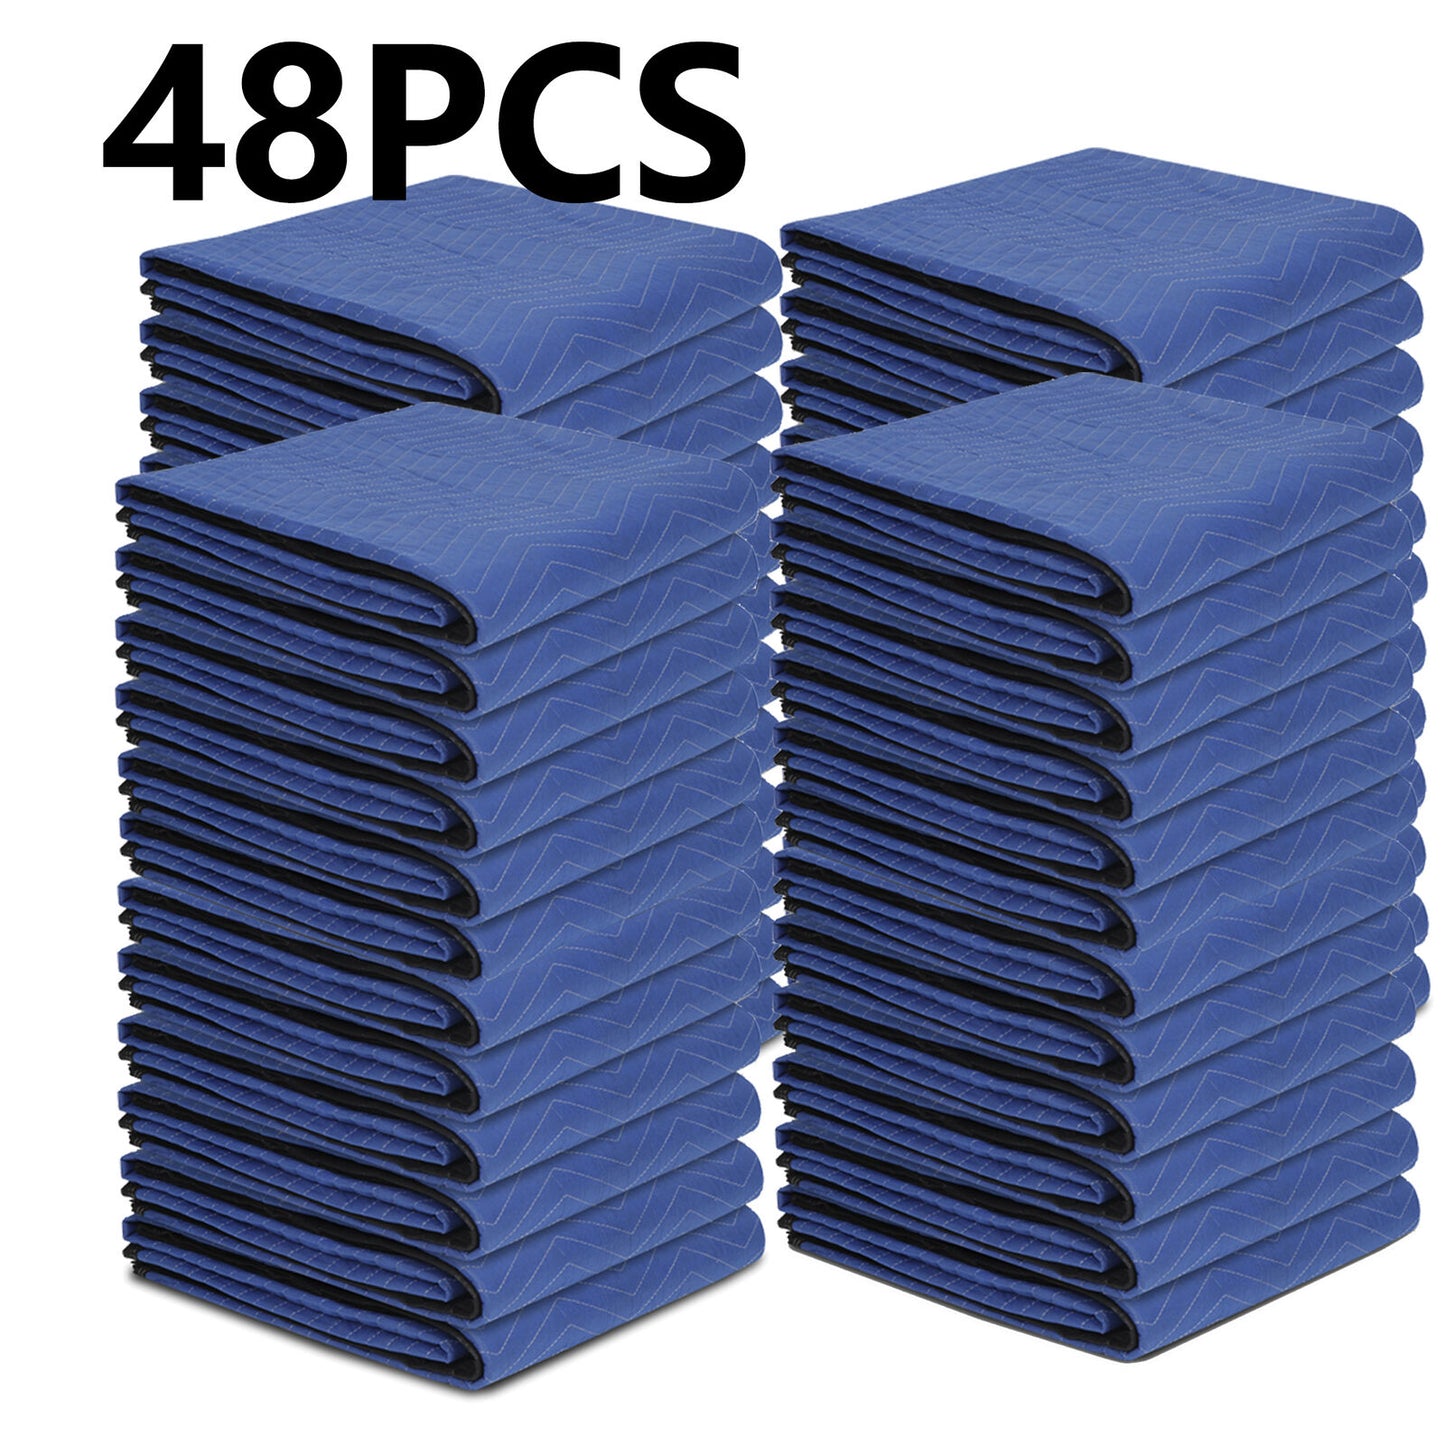 48 Moving Blankets 80" x 72" Mats Deluxe Quilted Shipping Furniture Pads 35lb/dz